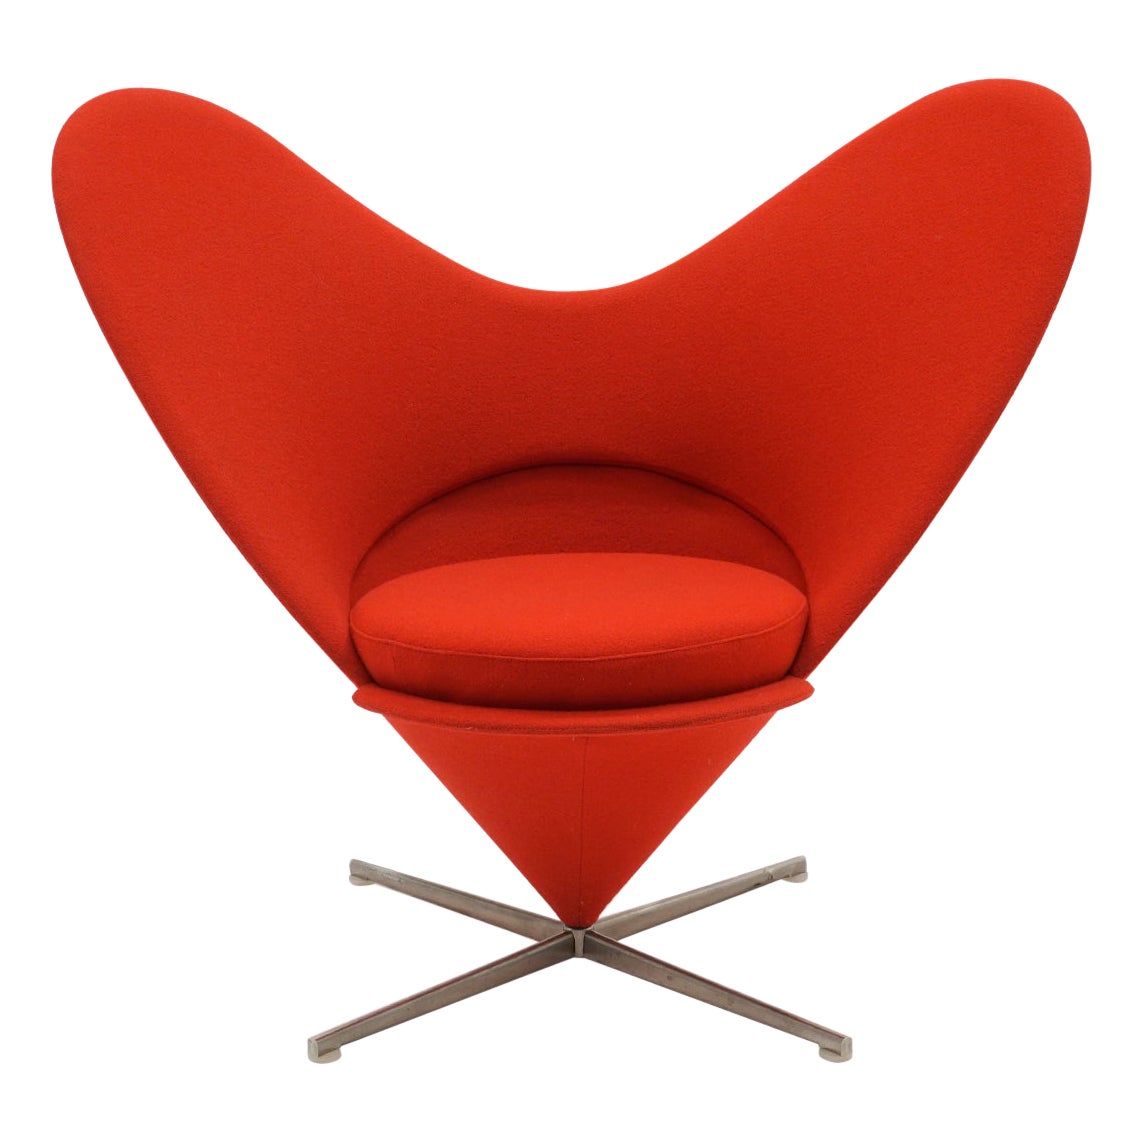 Red Heart Chair by Verner Panton for Vitra, Great Condition